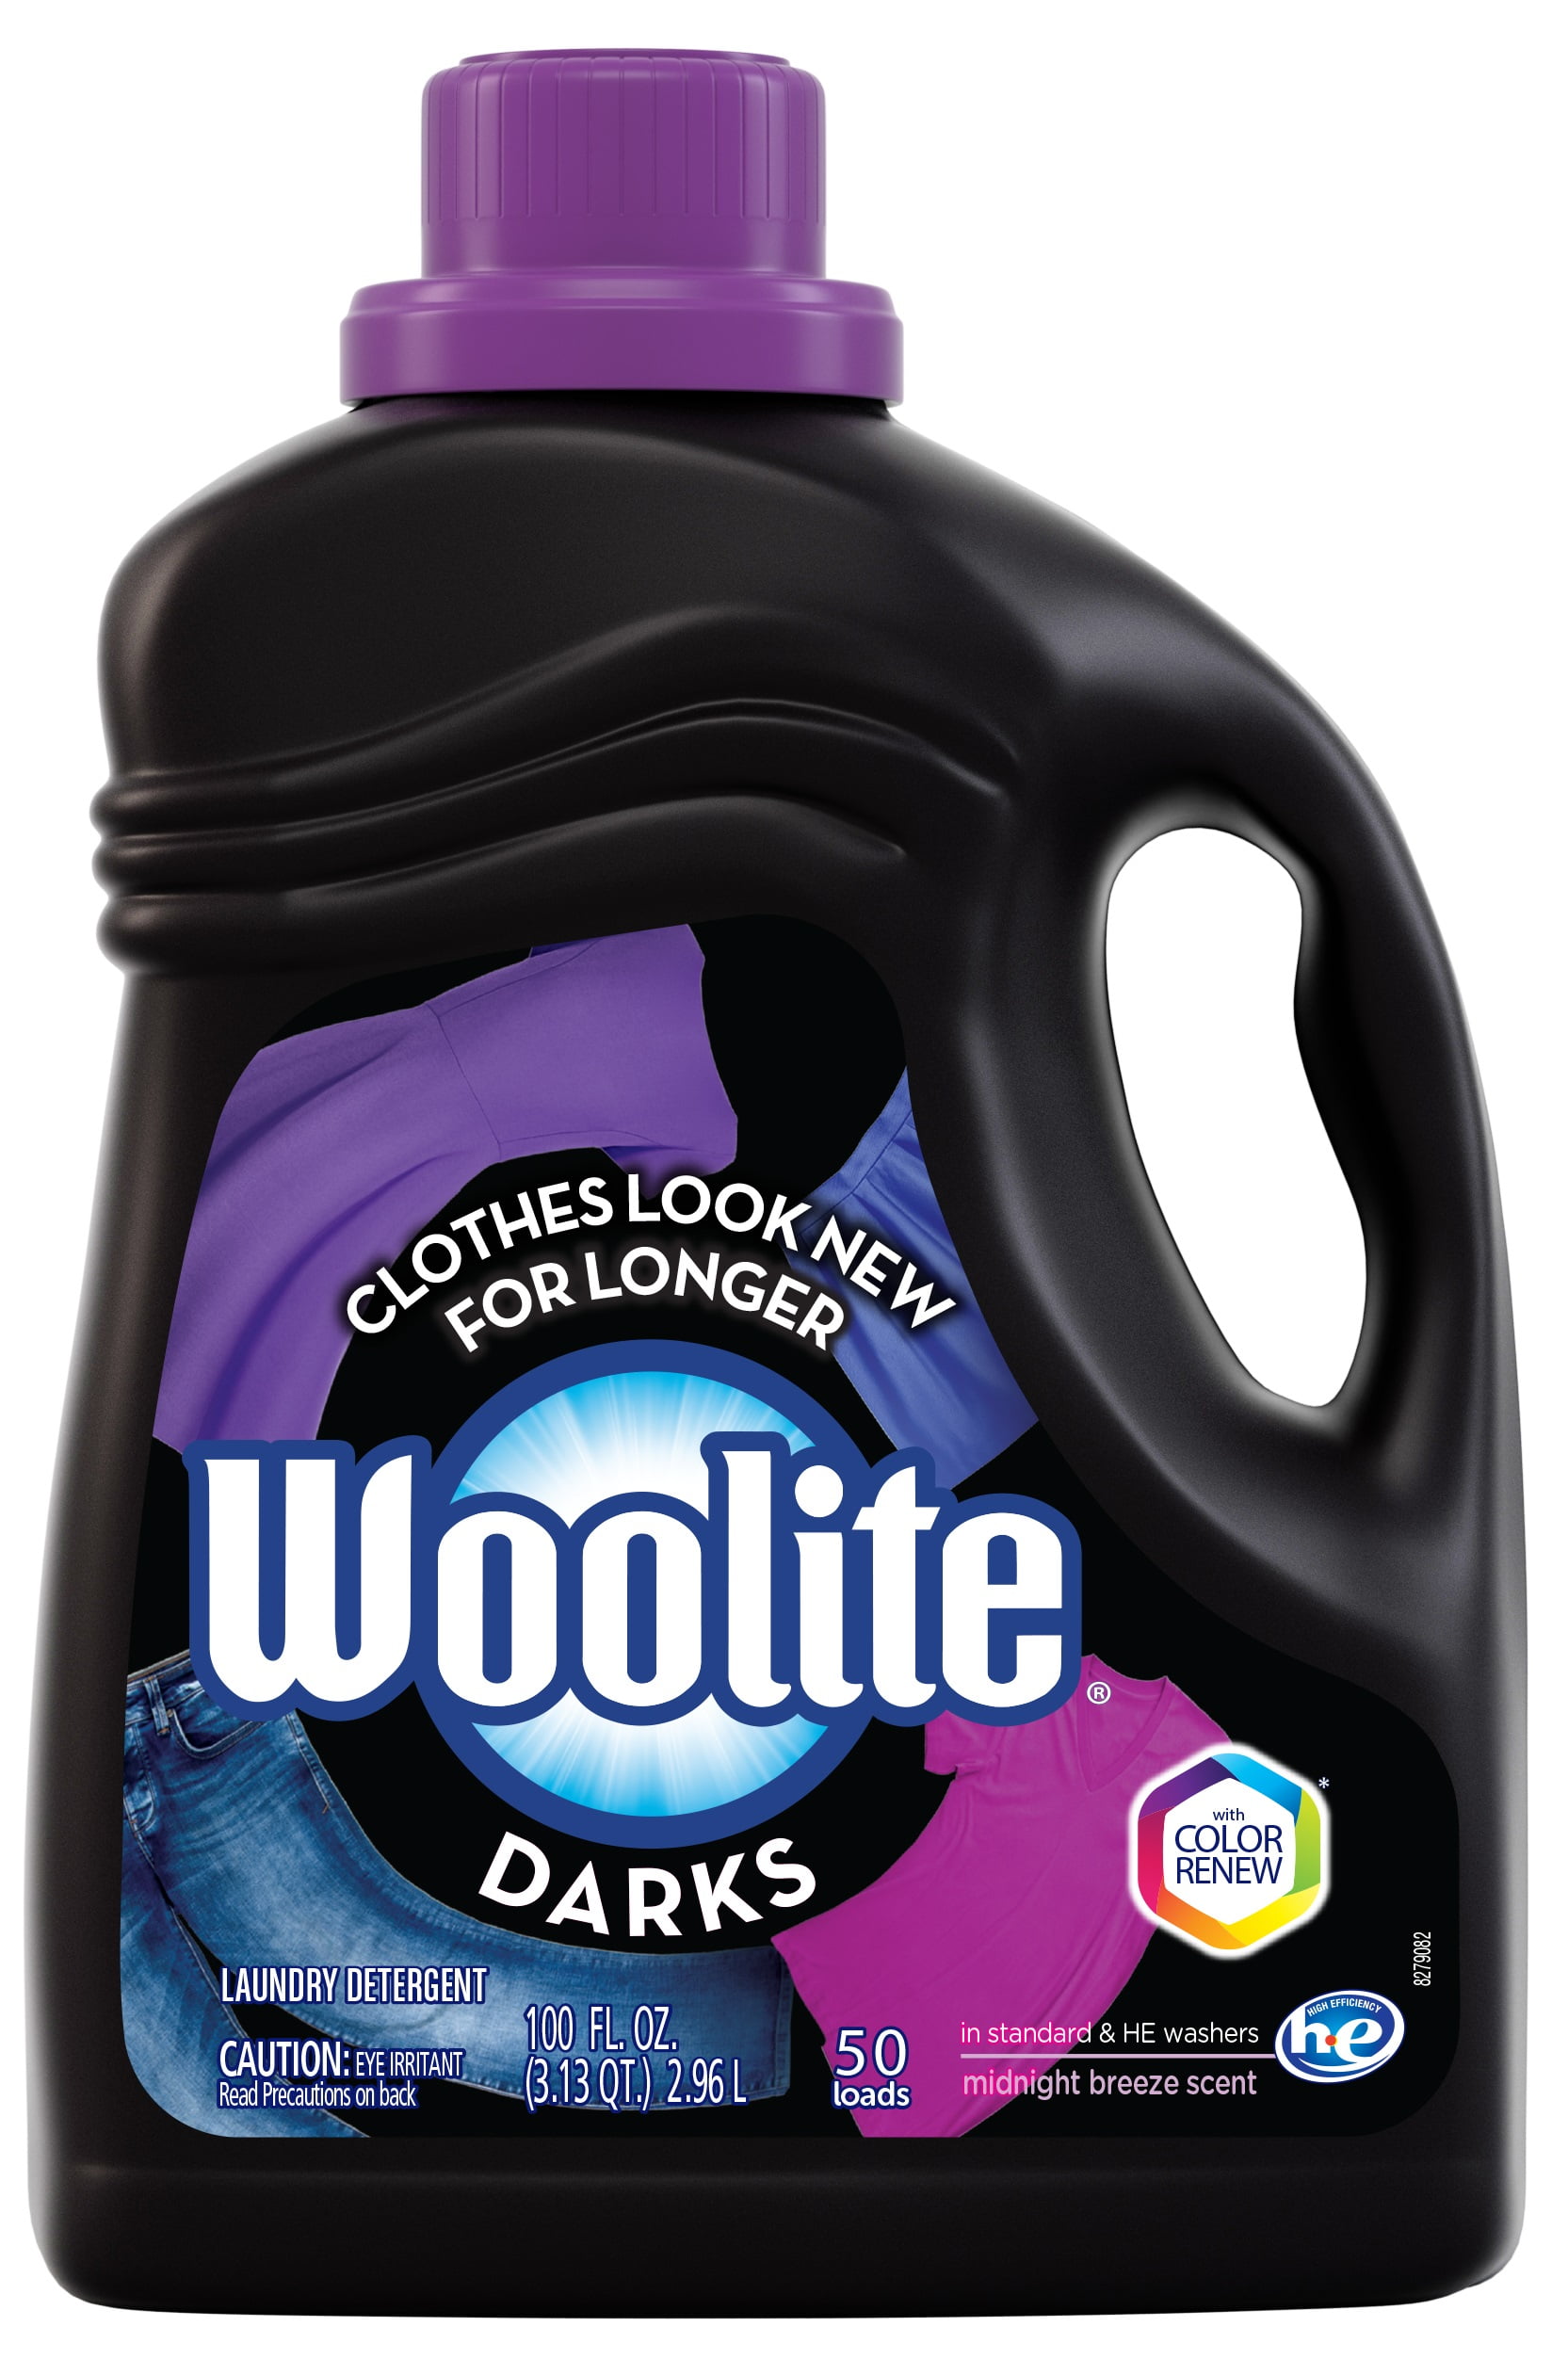 Woolite Darks Liquid Laundry Detergent 100 Fl Oz Bottle With for The Brilliant  Detergent For Black Clothes for  Ideas